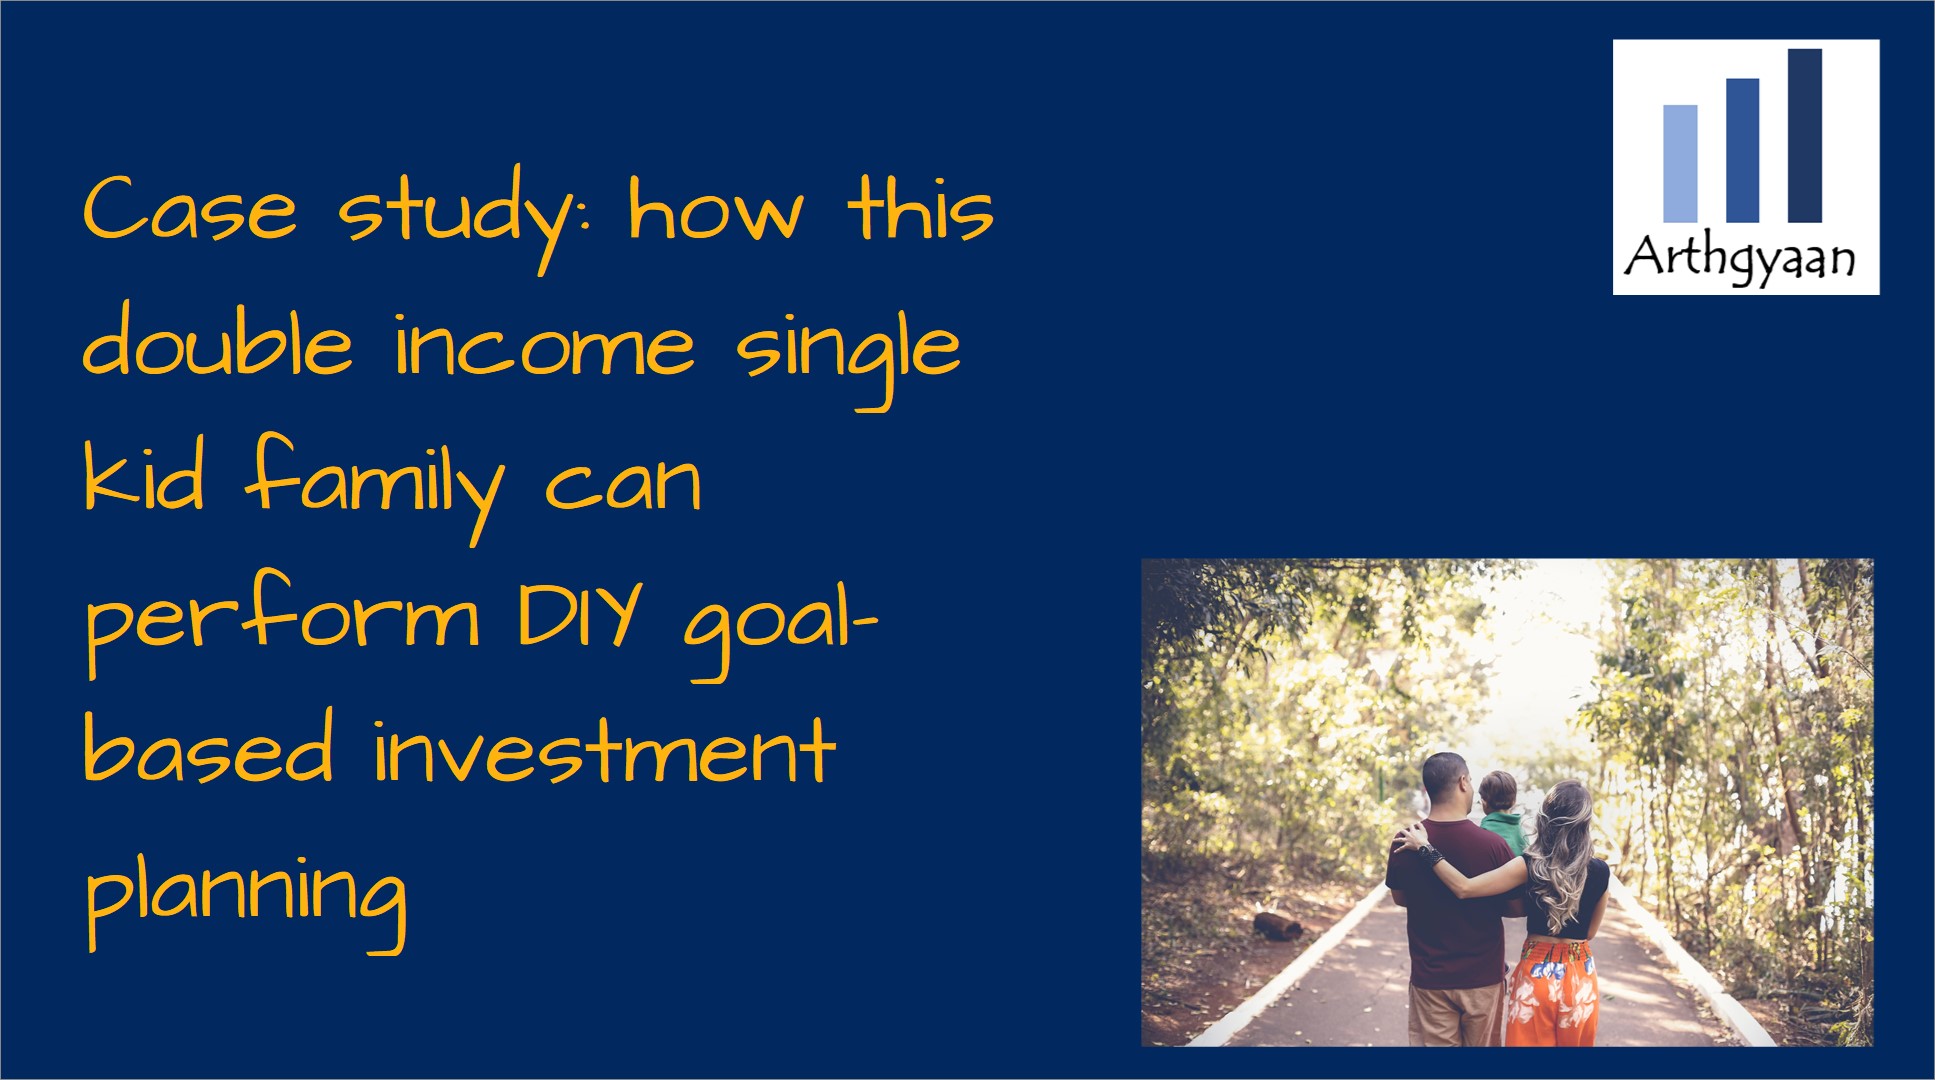 Case study: how this double income single kid family can perform DIY goal-based investment planning